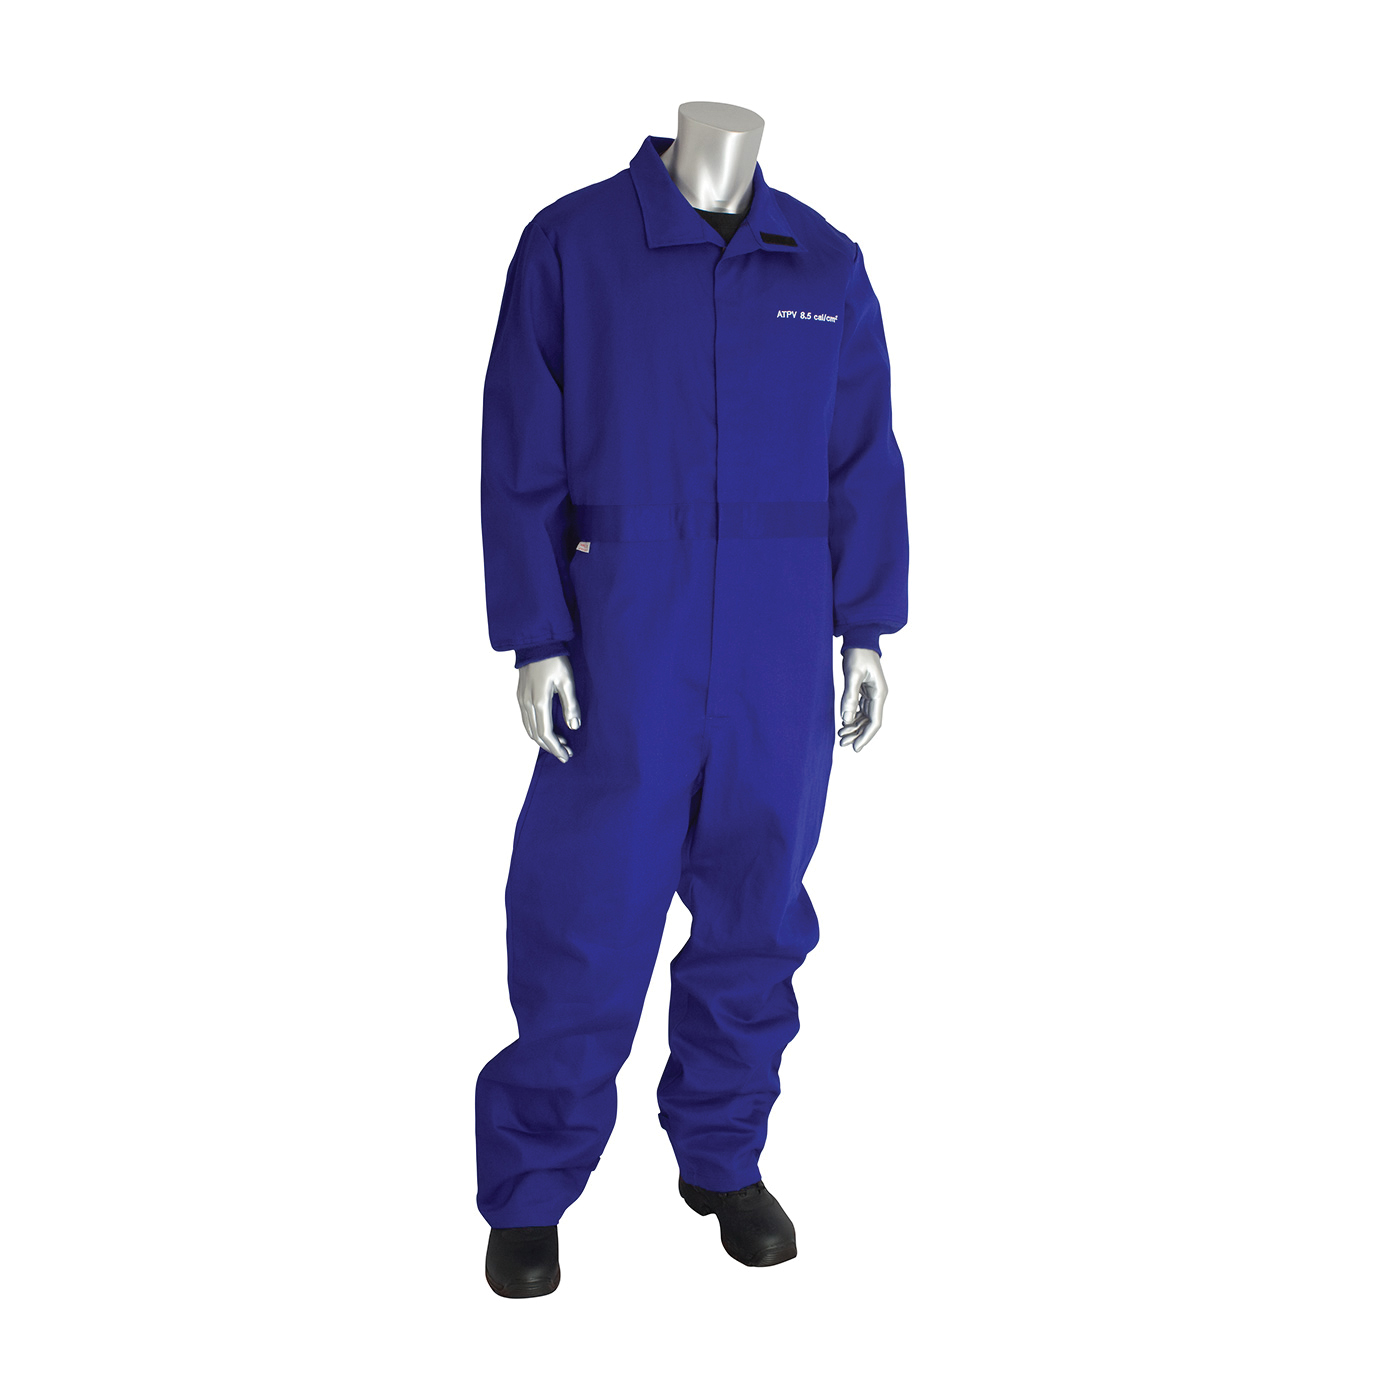 PIP® 9100-2120D/5X Flame Resistant Coverall With Vented Back, 5XL, Royal Blue, 90% Cotton/10% Nylon/FR Twill Weave, 64 to 66 in Chest, 32 in L Inseam